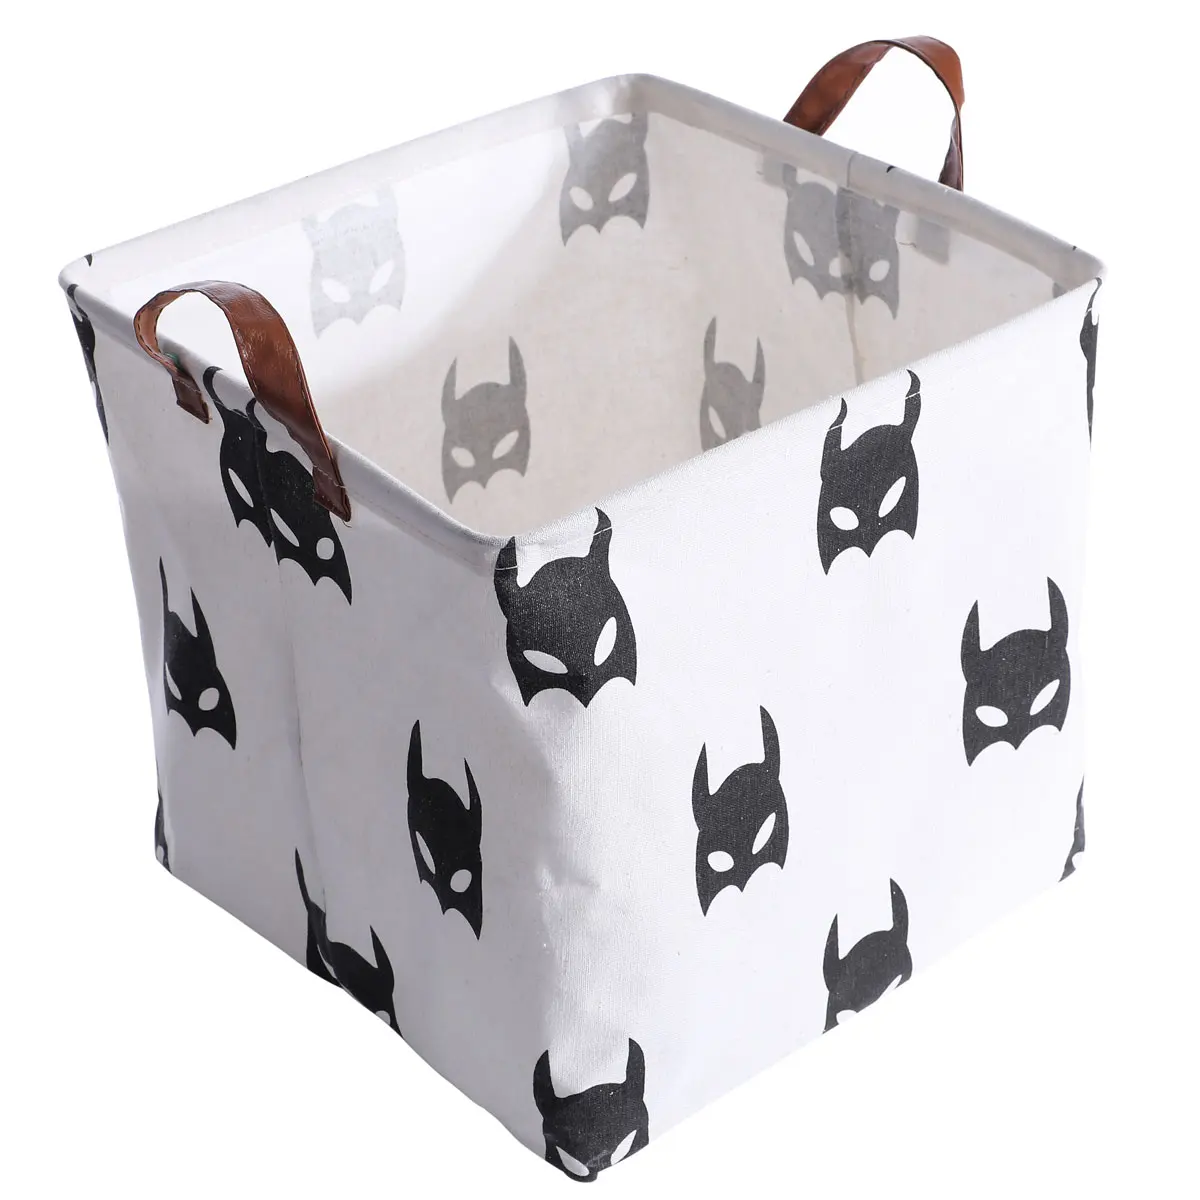 

1MI SLB-1-3 Bat Pattern Canvas with PE Cover Material Storage Baskets High Quality Waterproof Square Laundry Basket for Toy